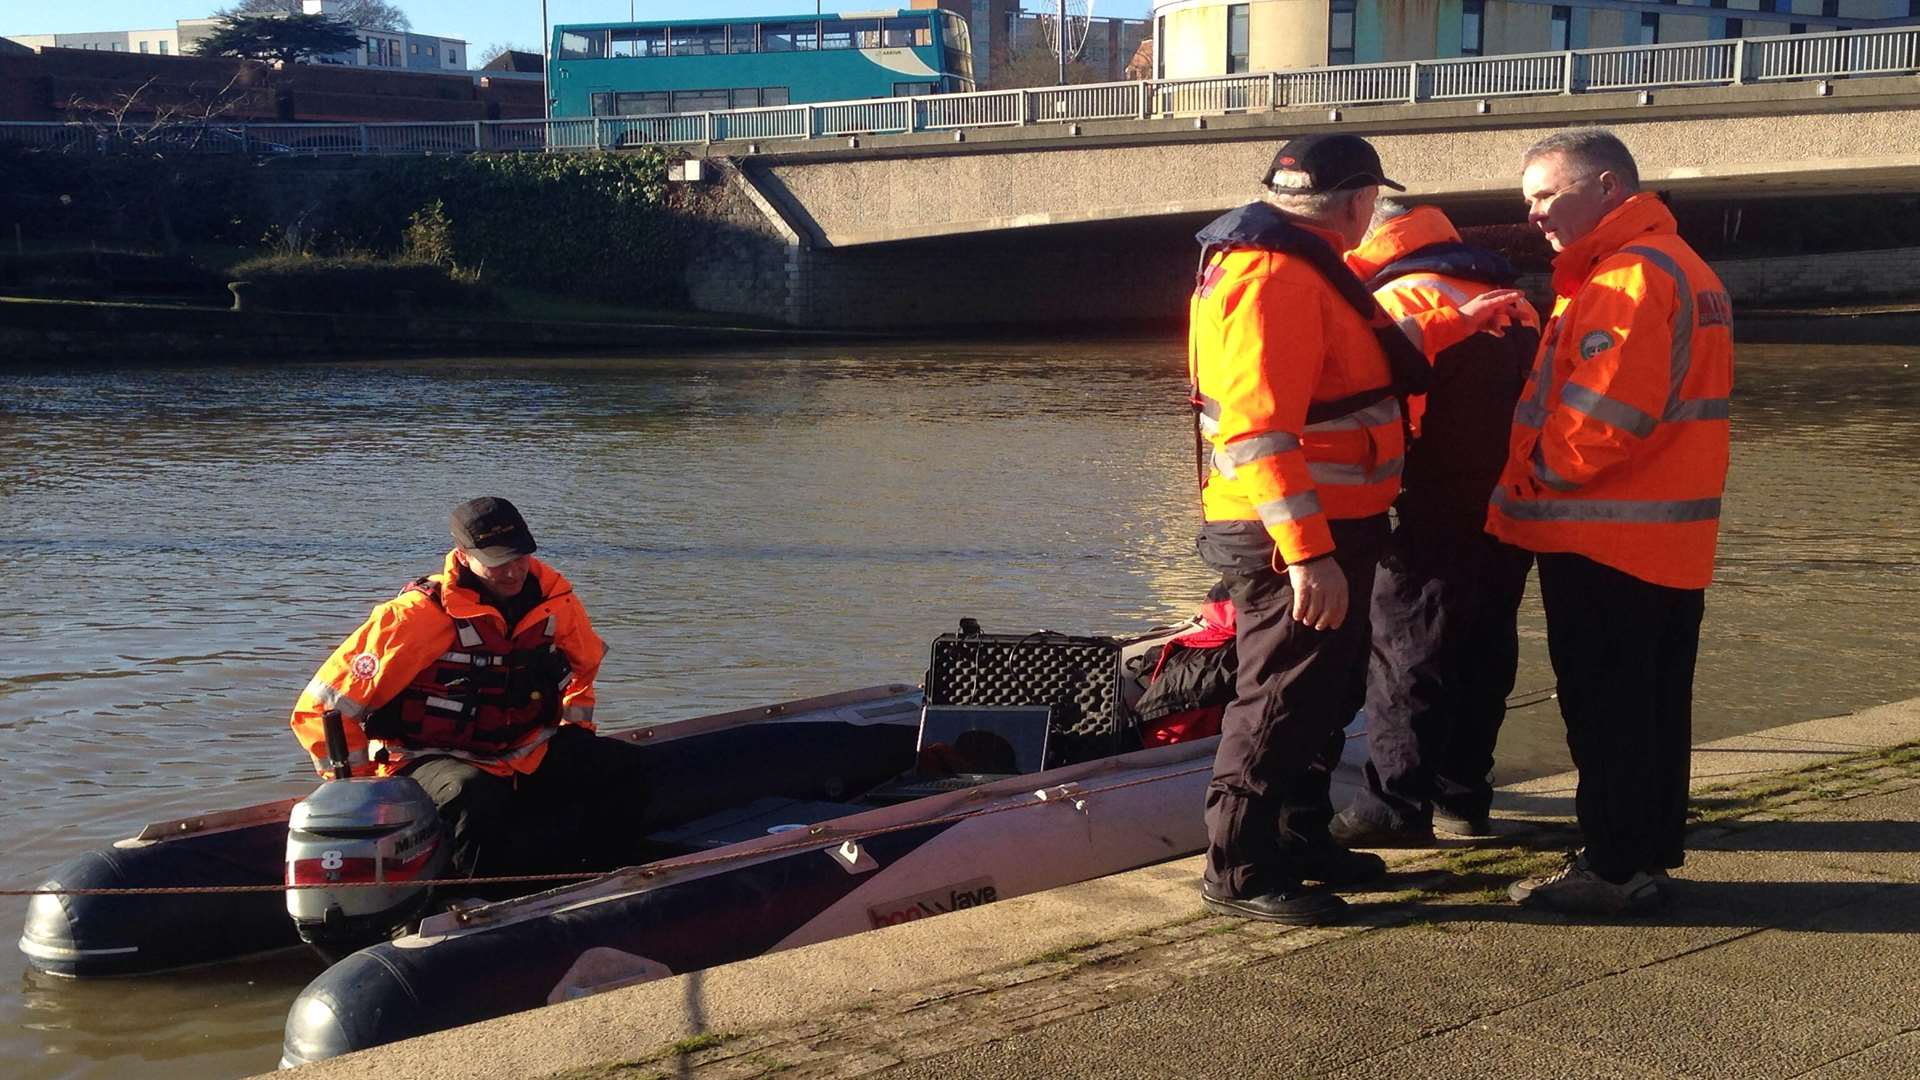 Specialist teams used sonar in the search for Pat Lamb